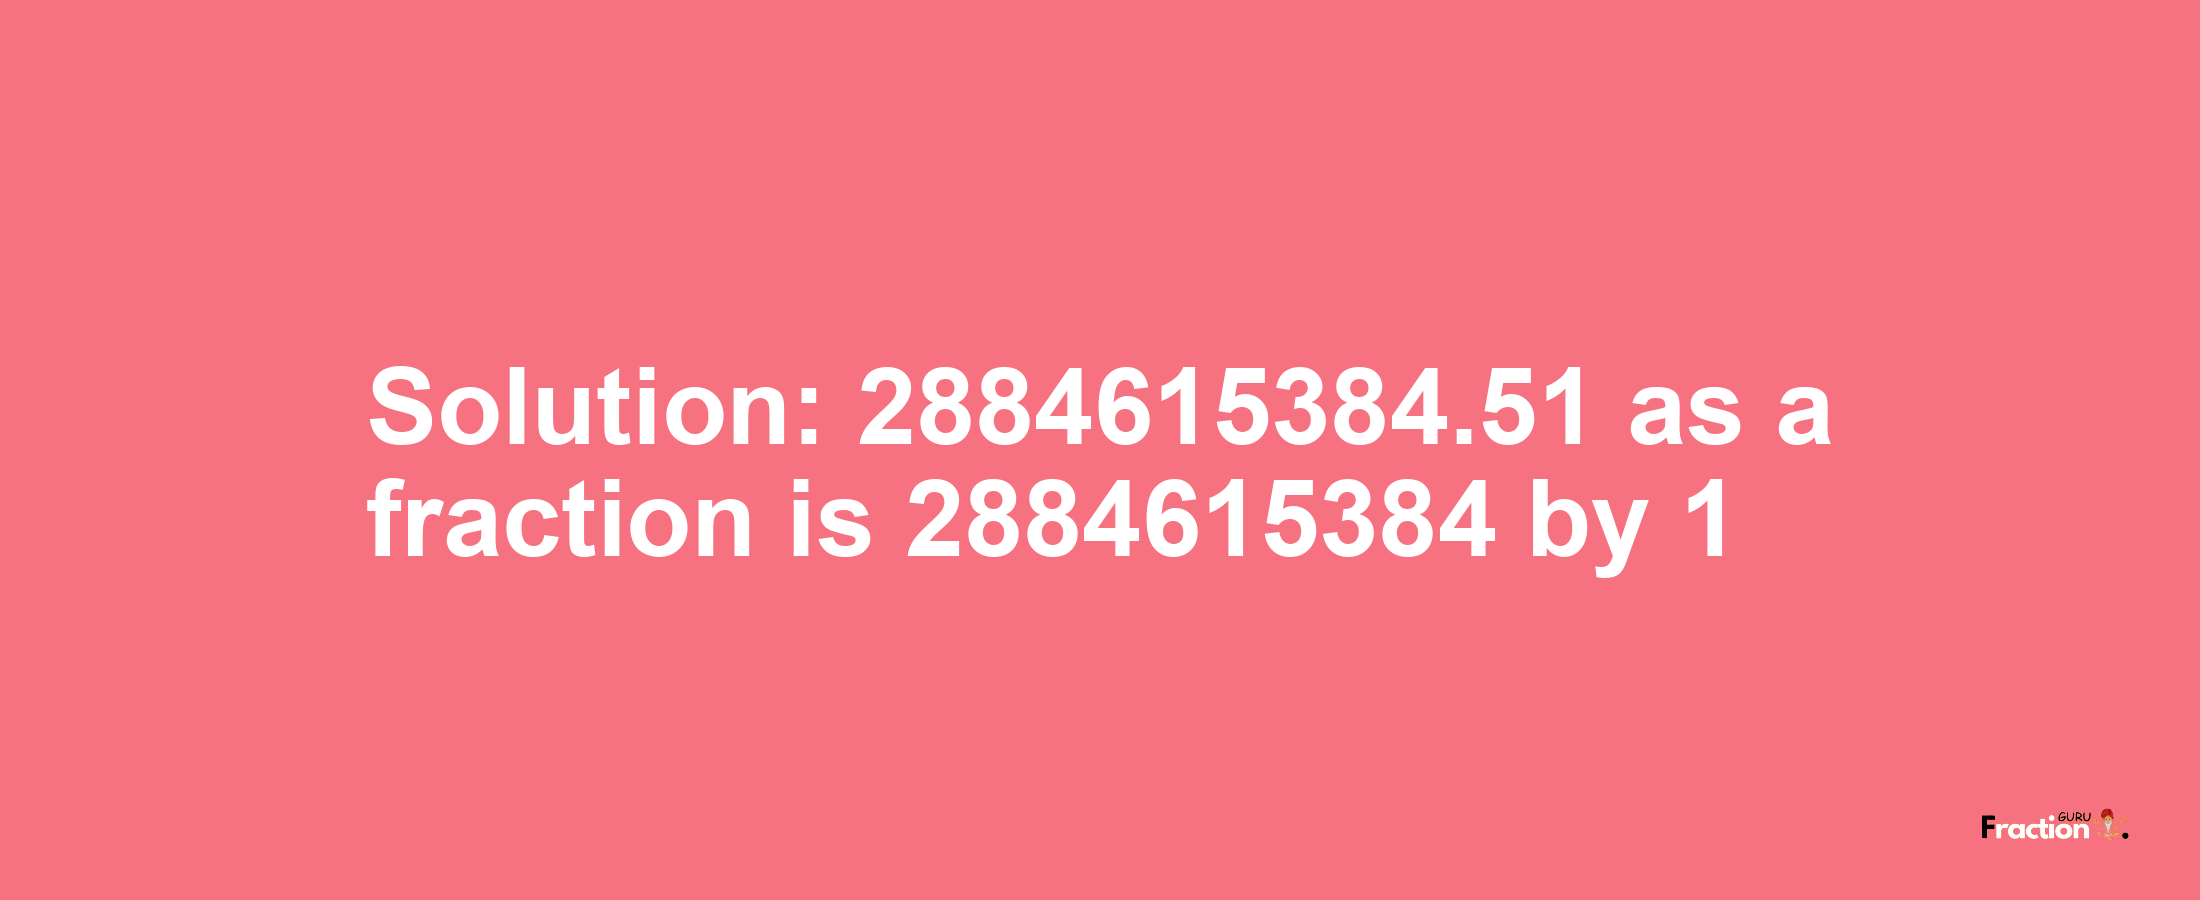 Solution:2884615384.51 as a fraction is 2884615384/1